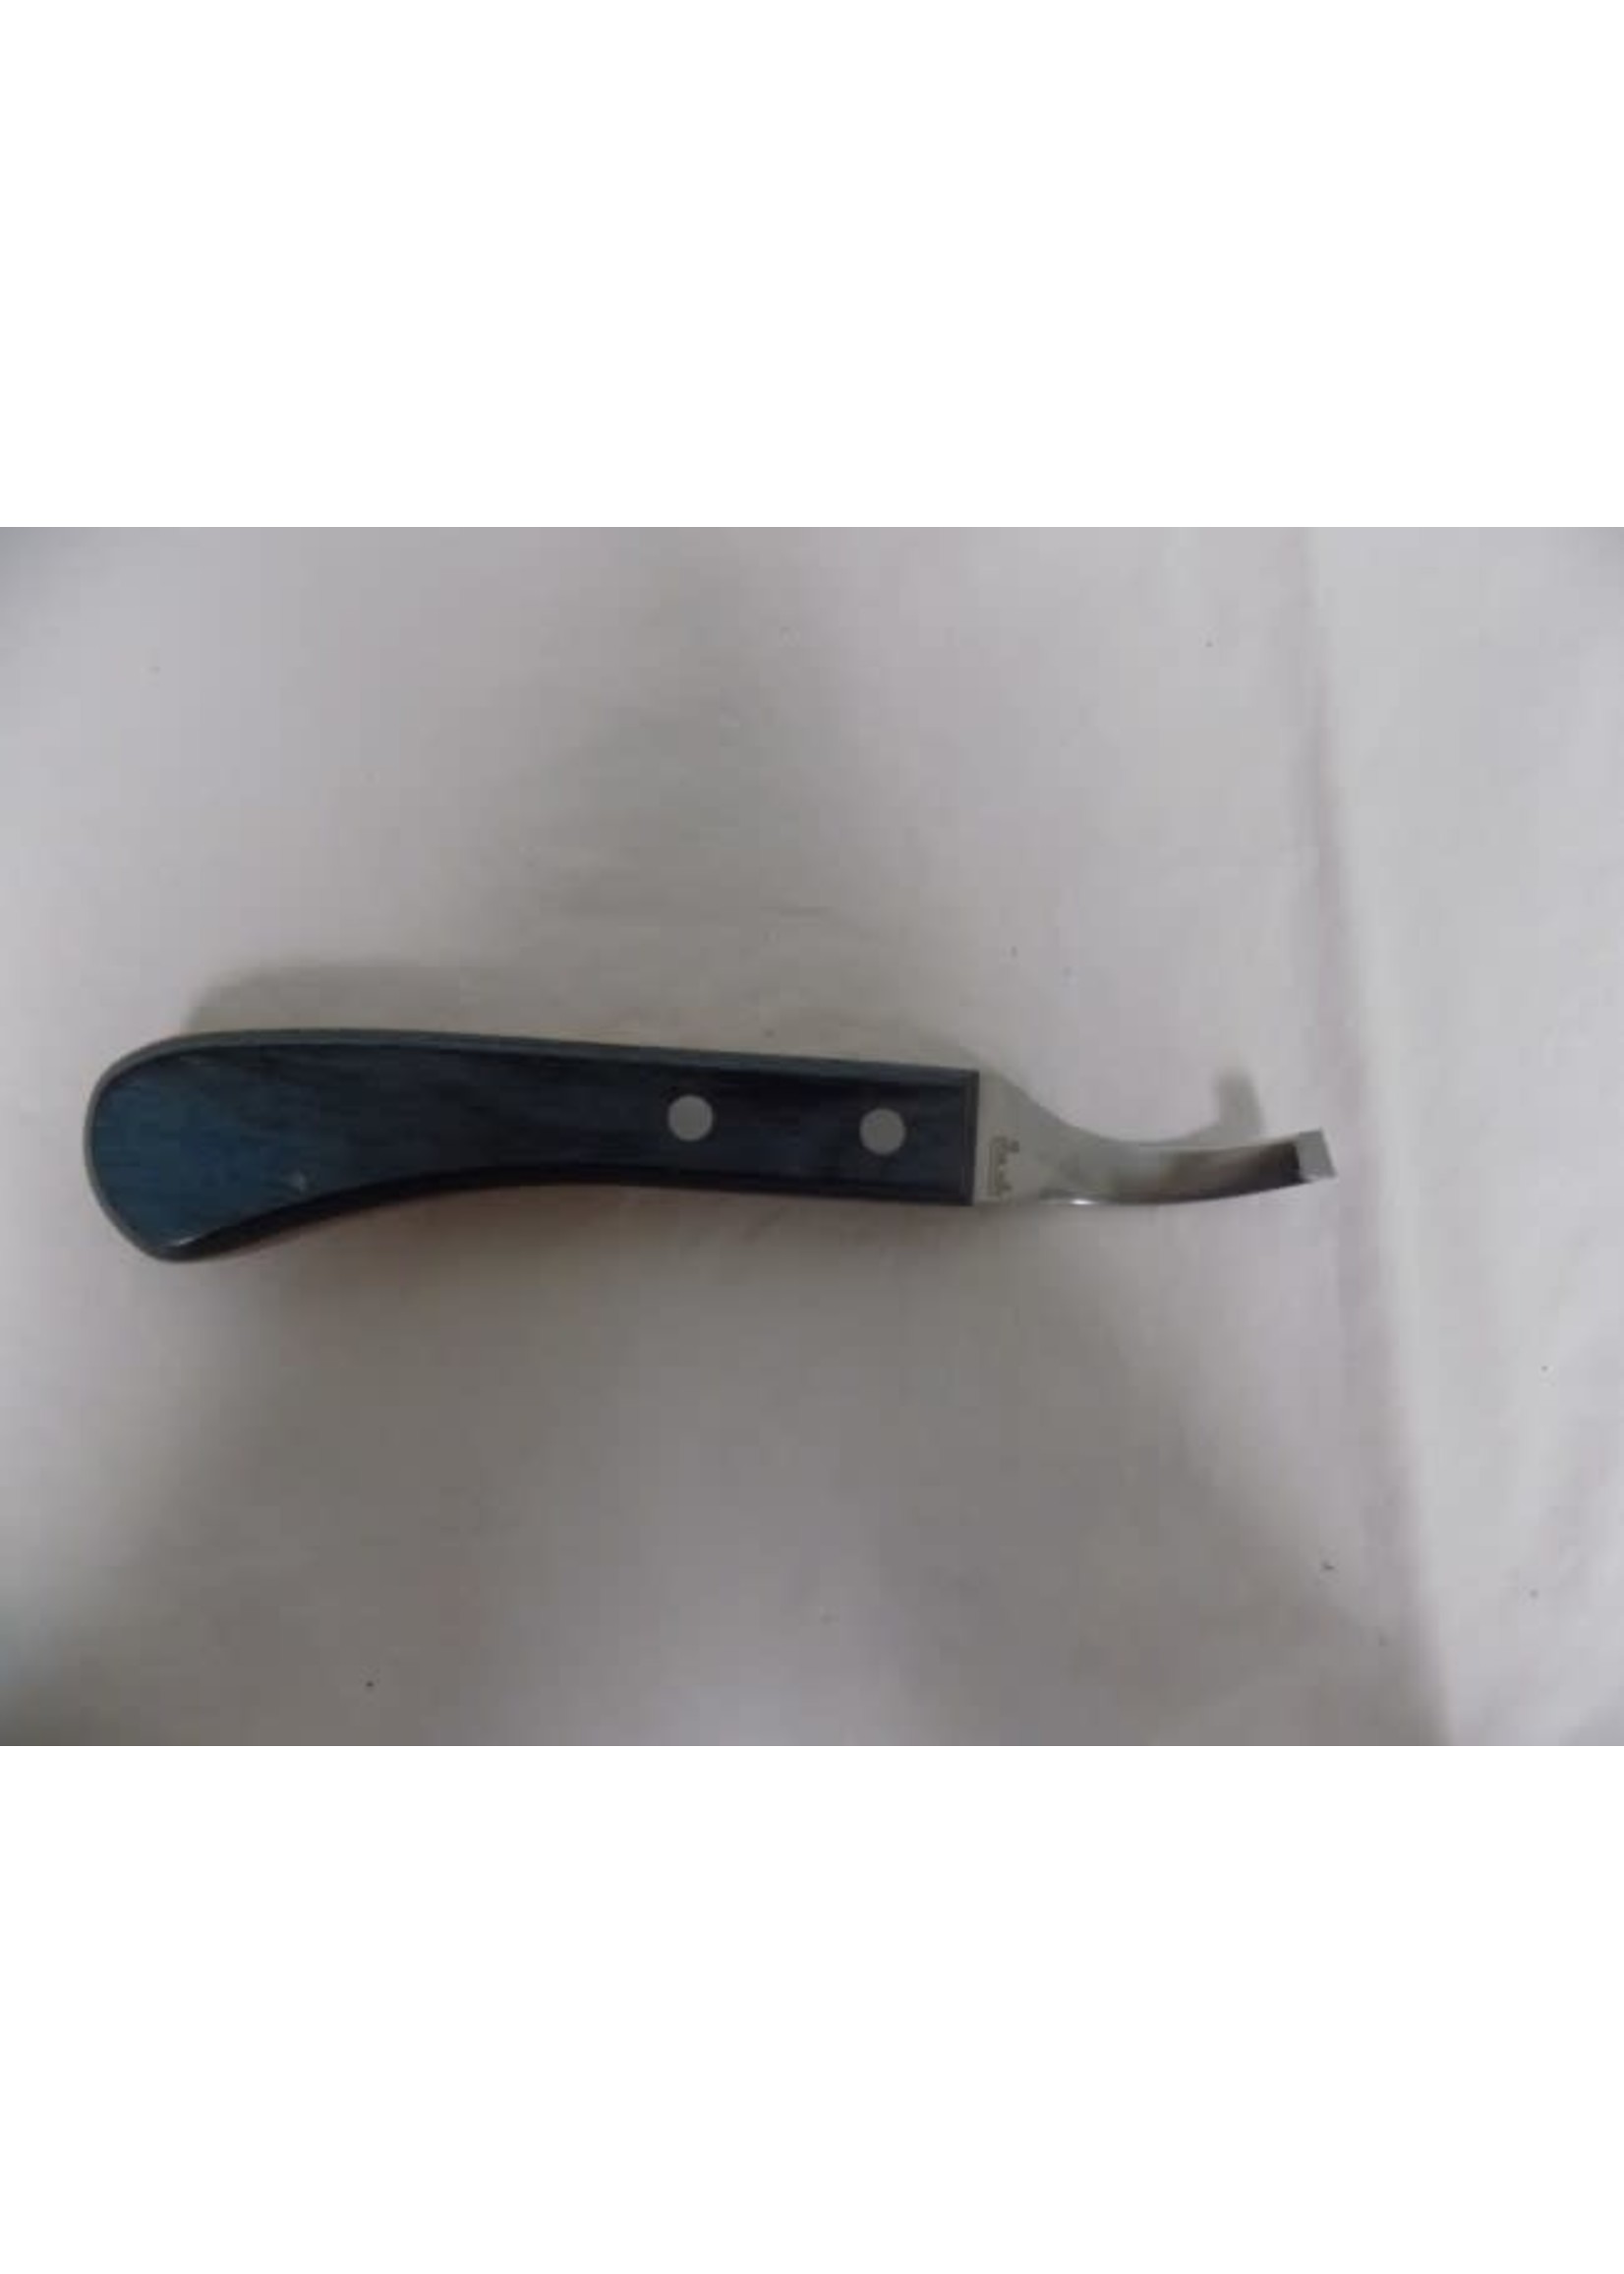 Bloom Forge Bloom offset Right Handed Knife